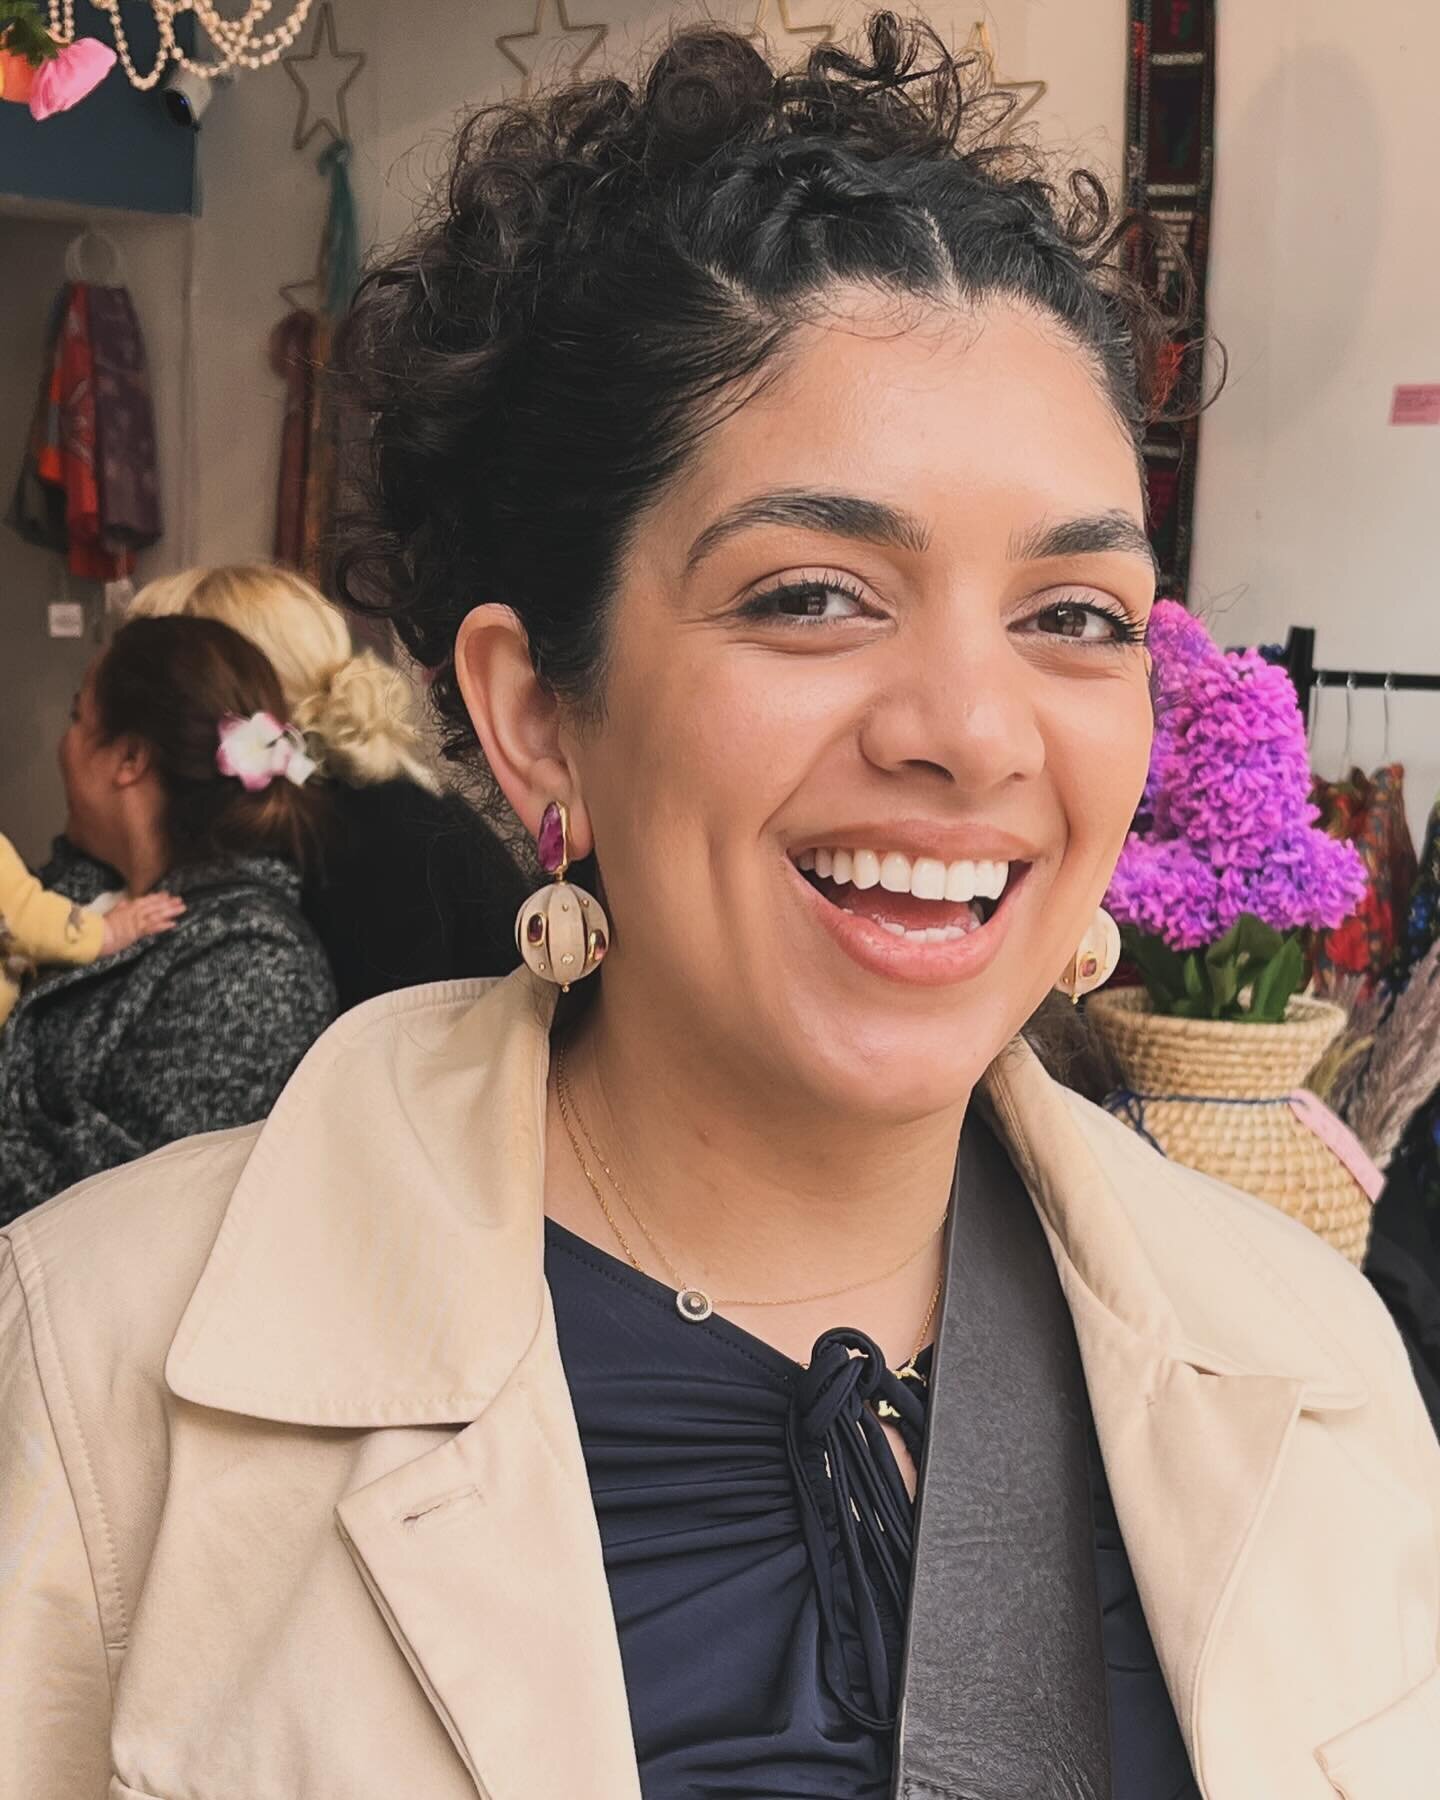 An Omani pomegranate queen rocking her favourite AKASYA earrings 💗 If you don&rsquo;t already know @dinewithdina she is not one to be missed 🏃 She cooks mouth watering dishes and is serious about representing her culture authentically 🙌 Oh and I p